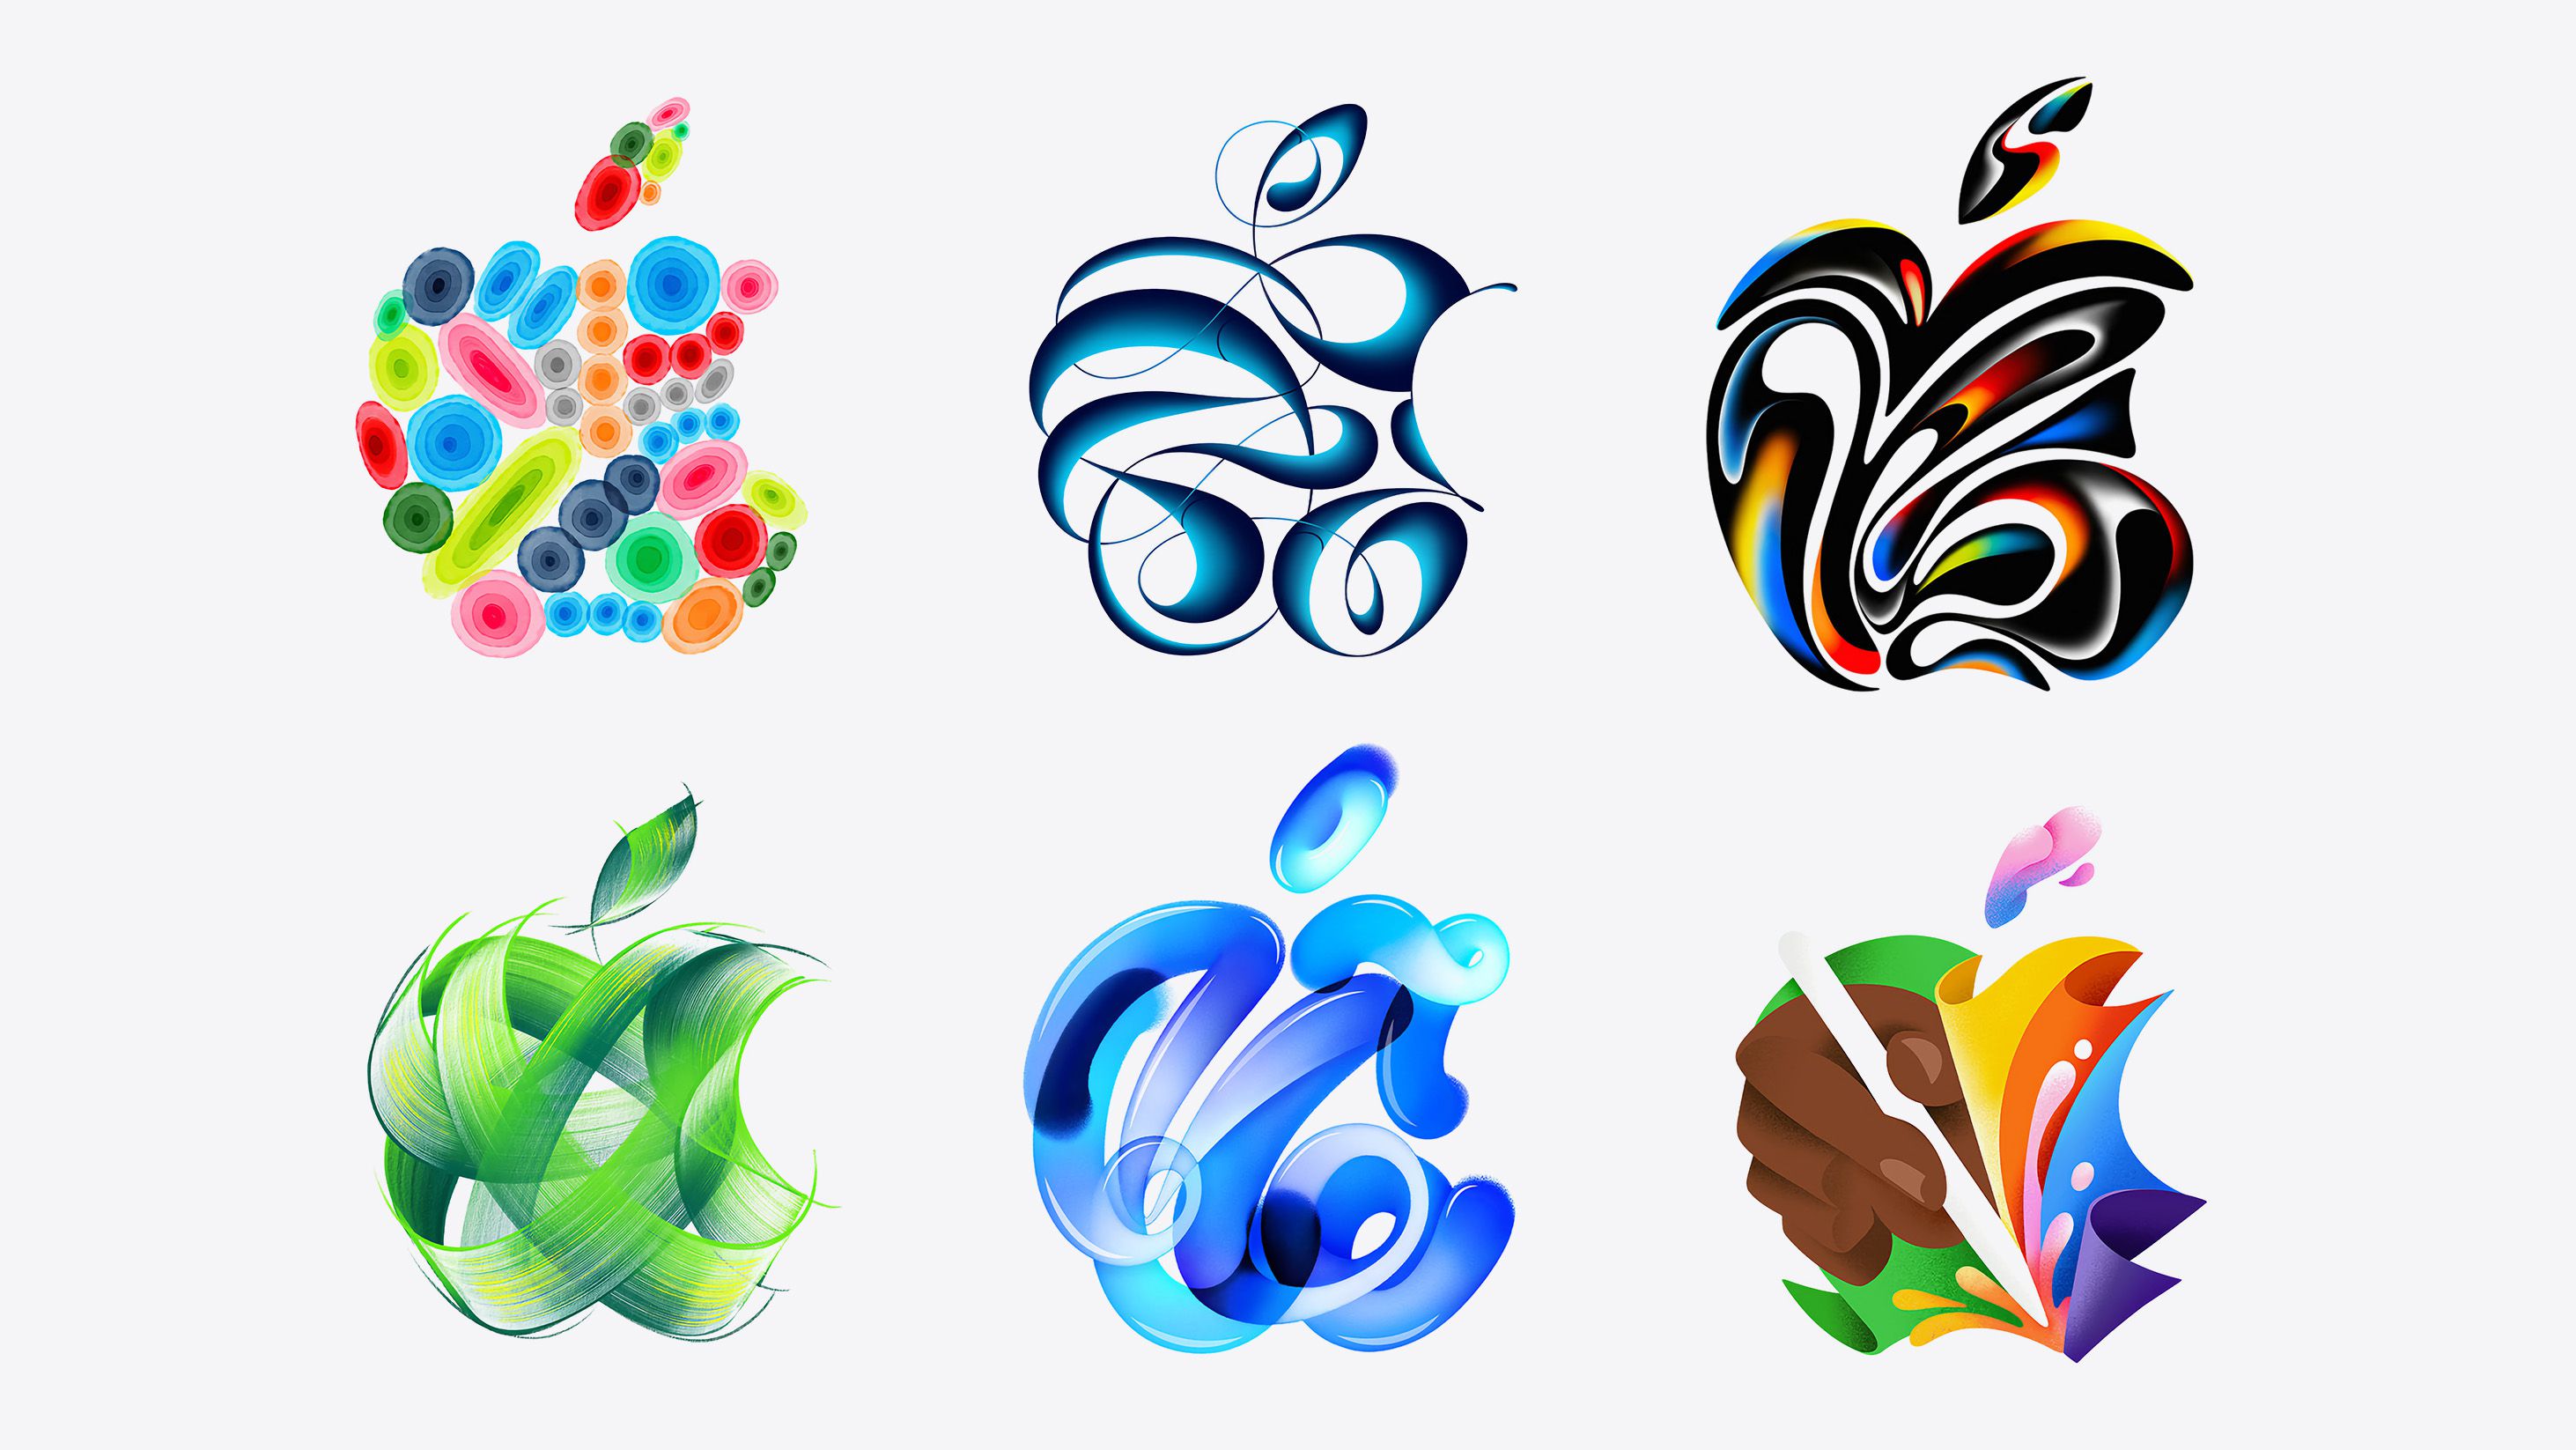 Apple Event on May 7 Has Six Artistic Logos as Tim Cook Hints at New Apple Pencil - MacRumors